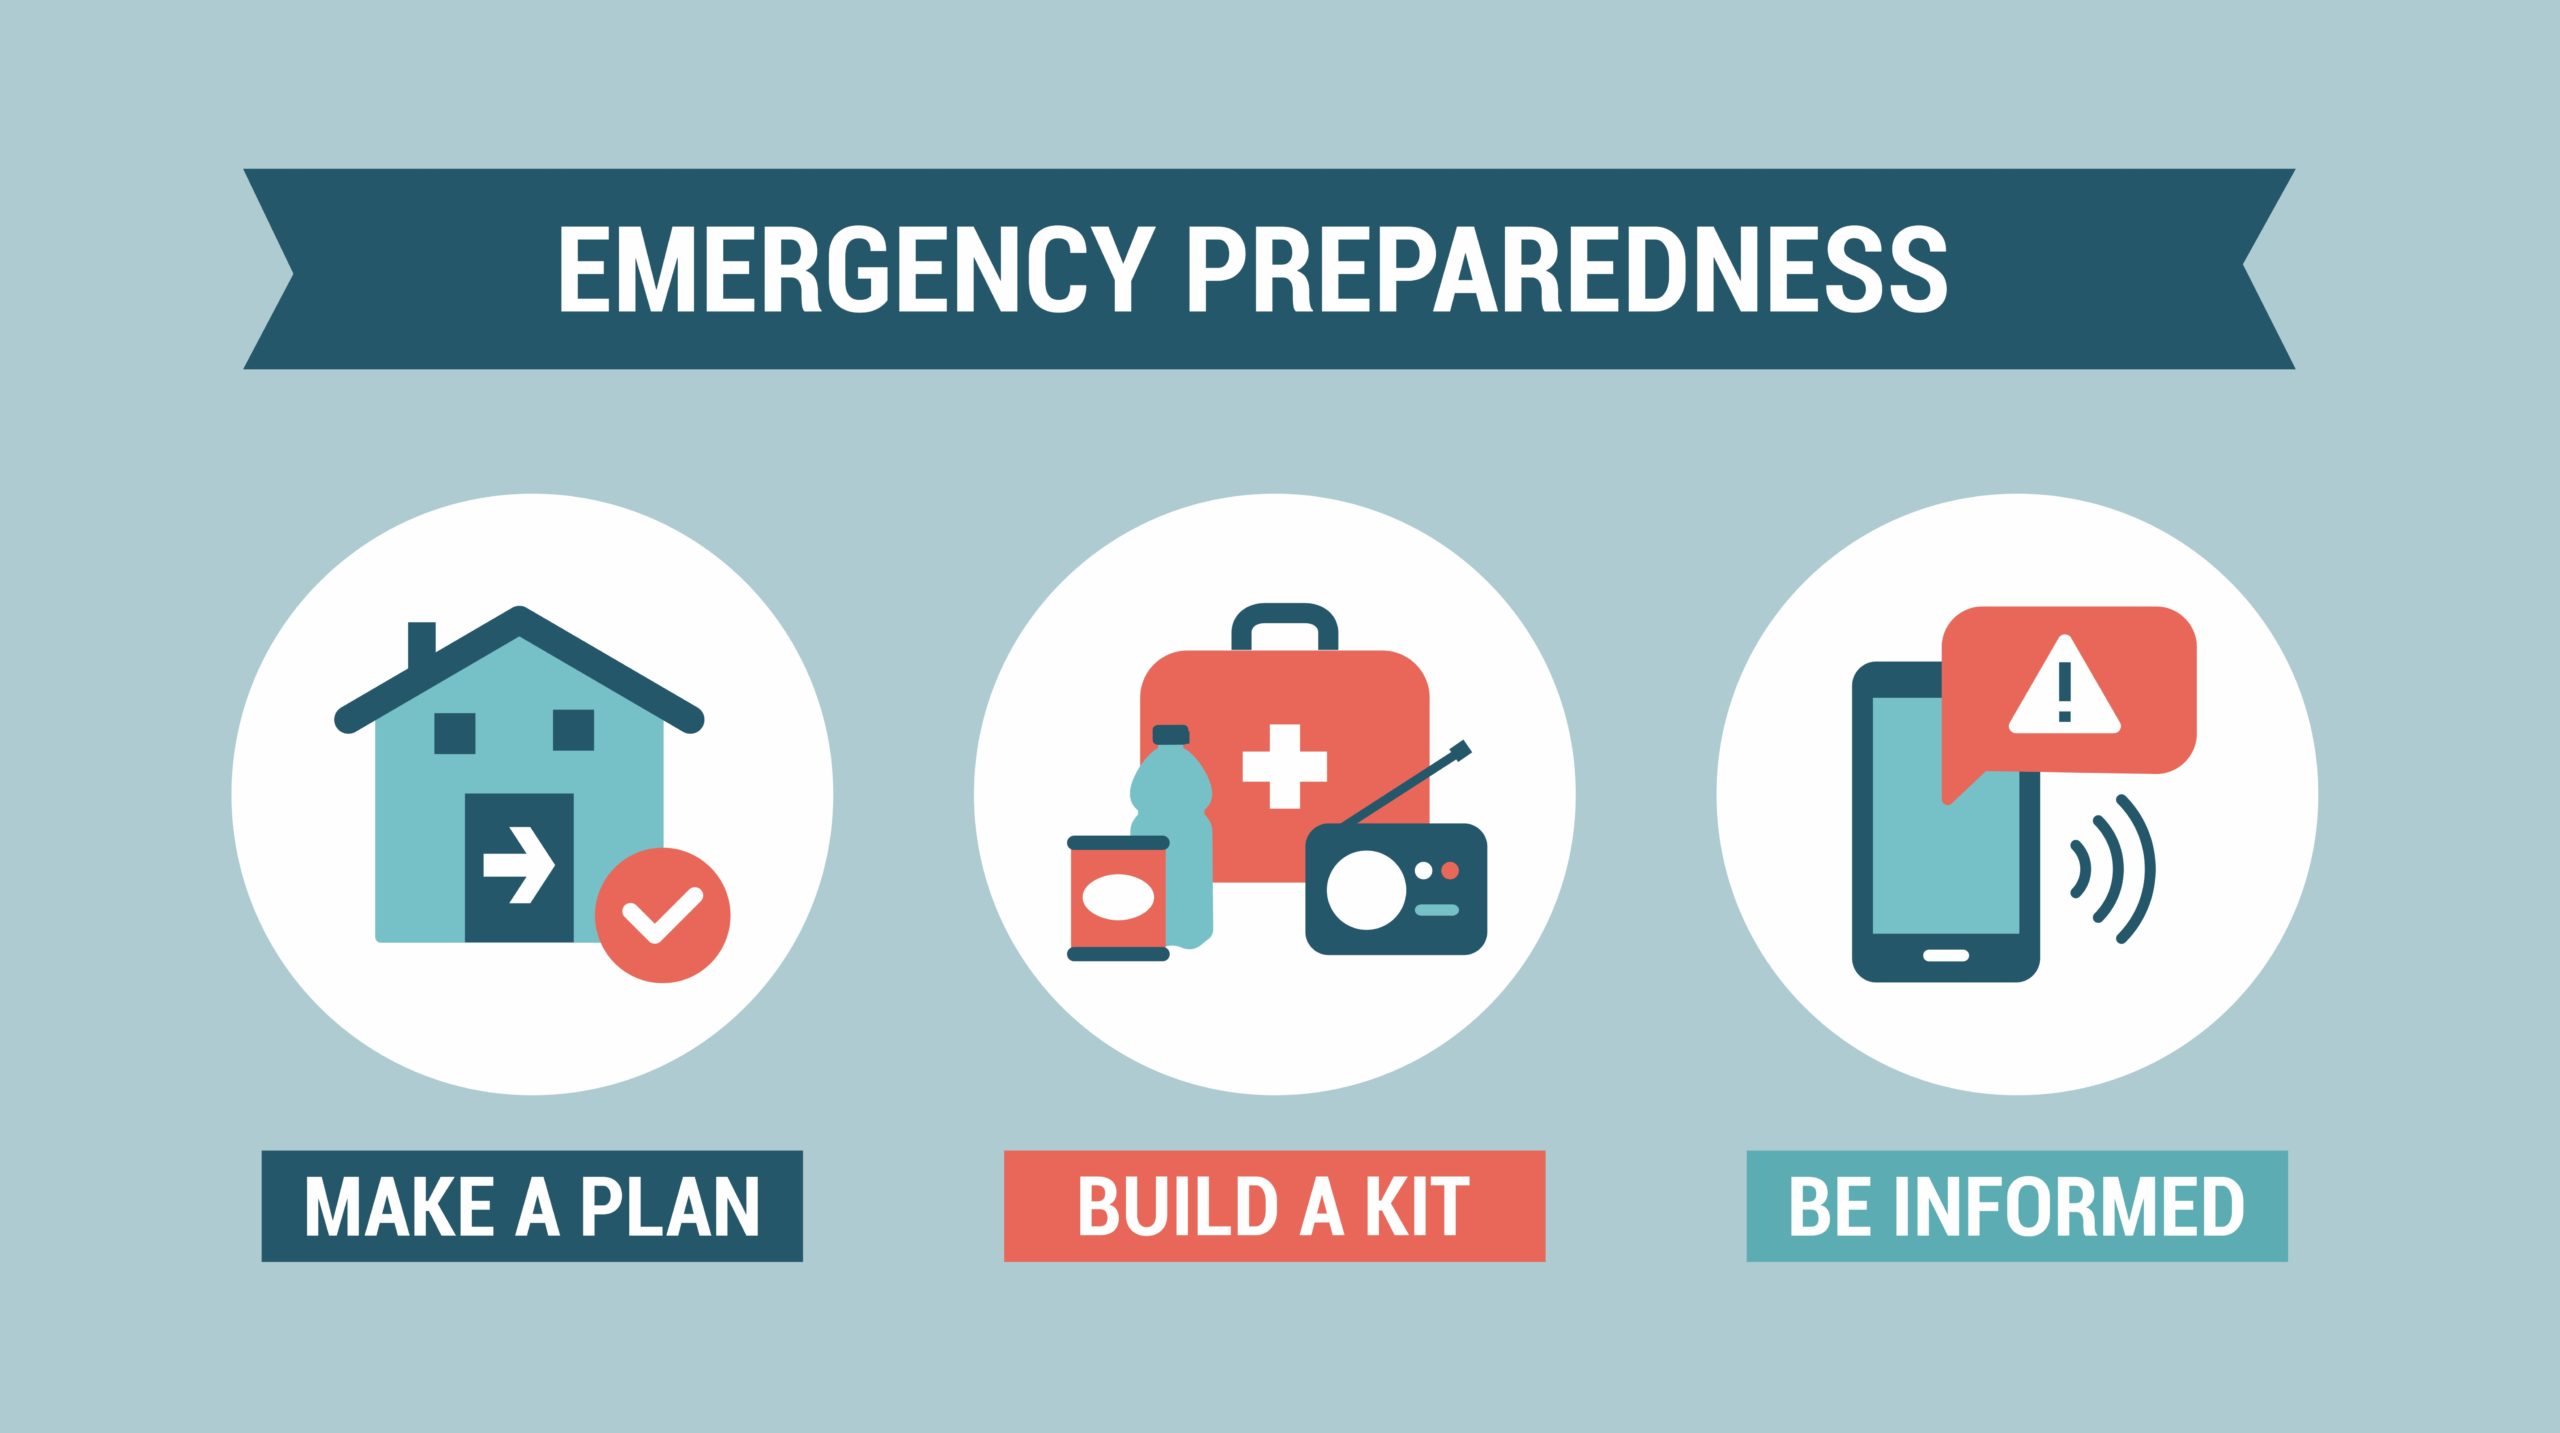 An image with a banner reading "Emergency Preparedness." There are three images below the banner stating "Make a Plan," "Build a Kit," and "Be Informed."